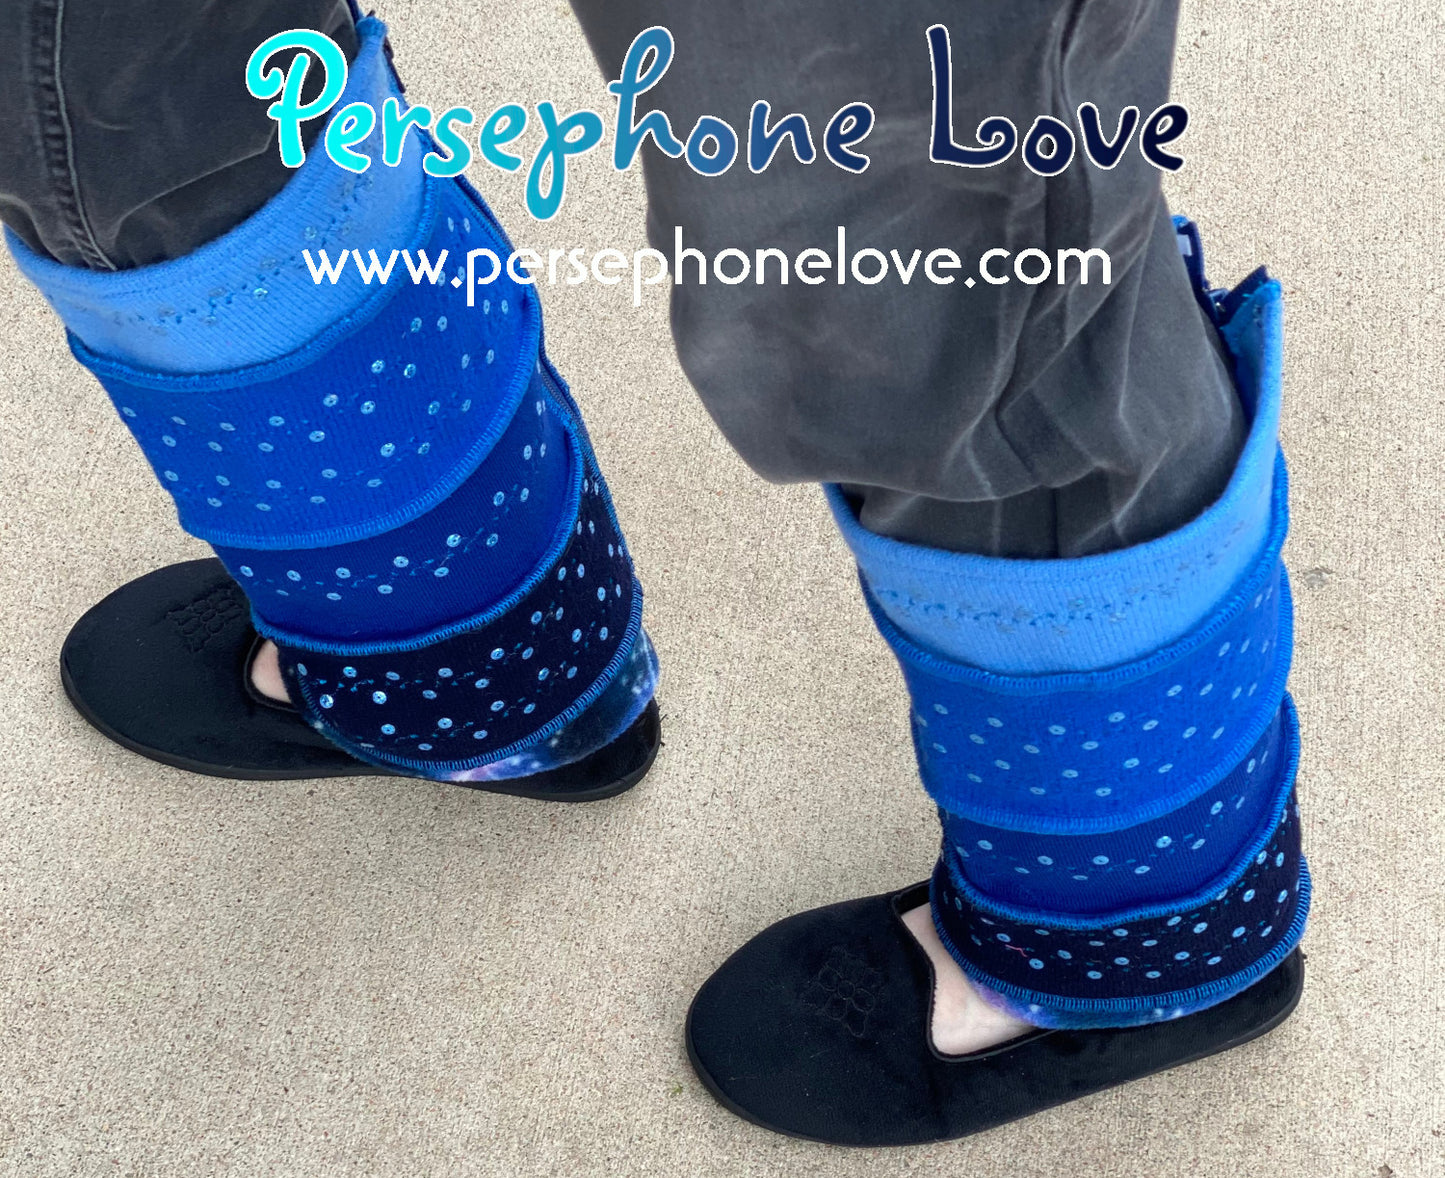 Katwise-inspired blue gradient fleece/wool embroidered sequins leg warmers-1461